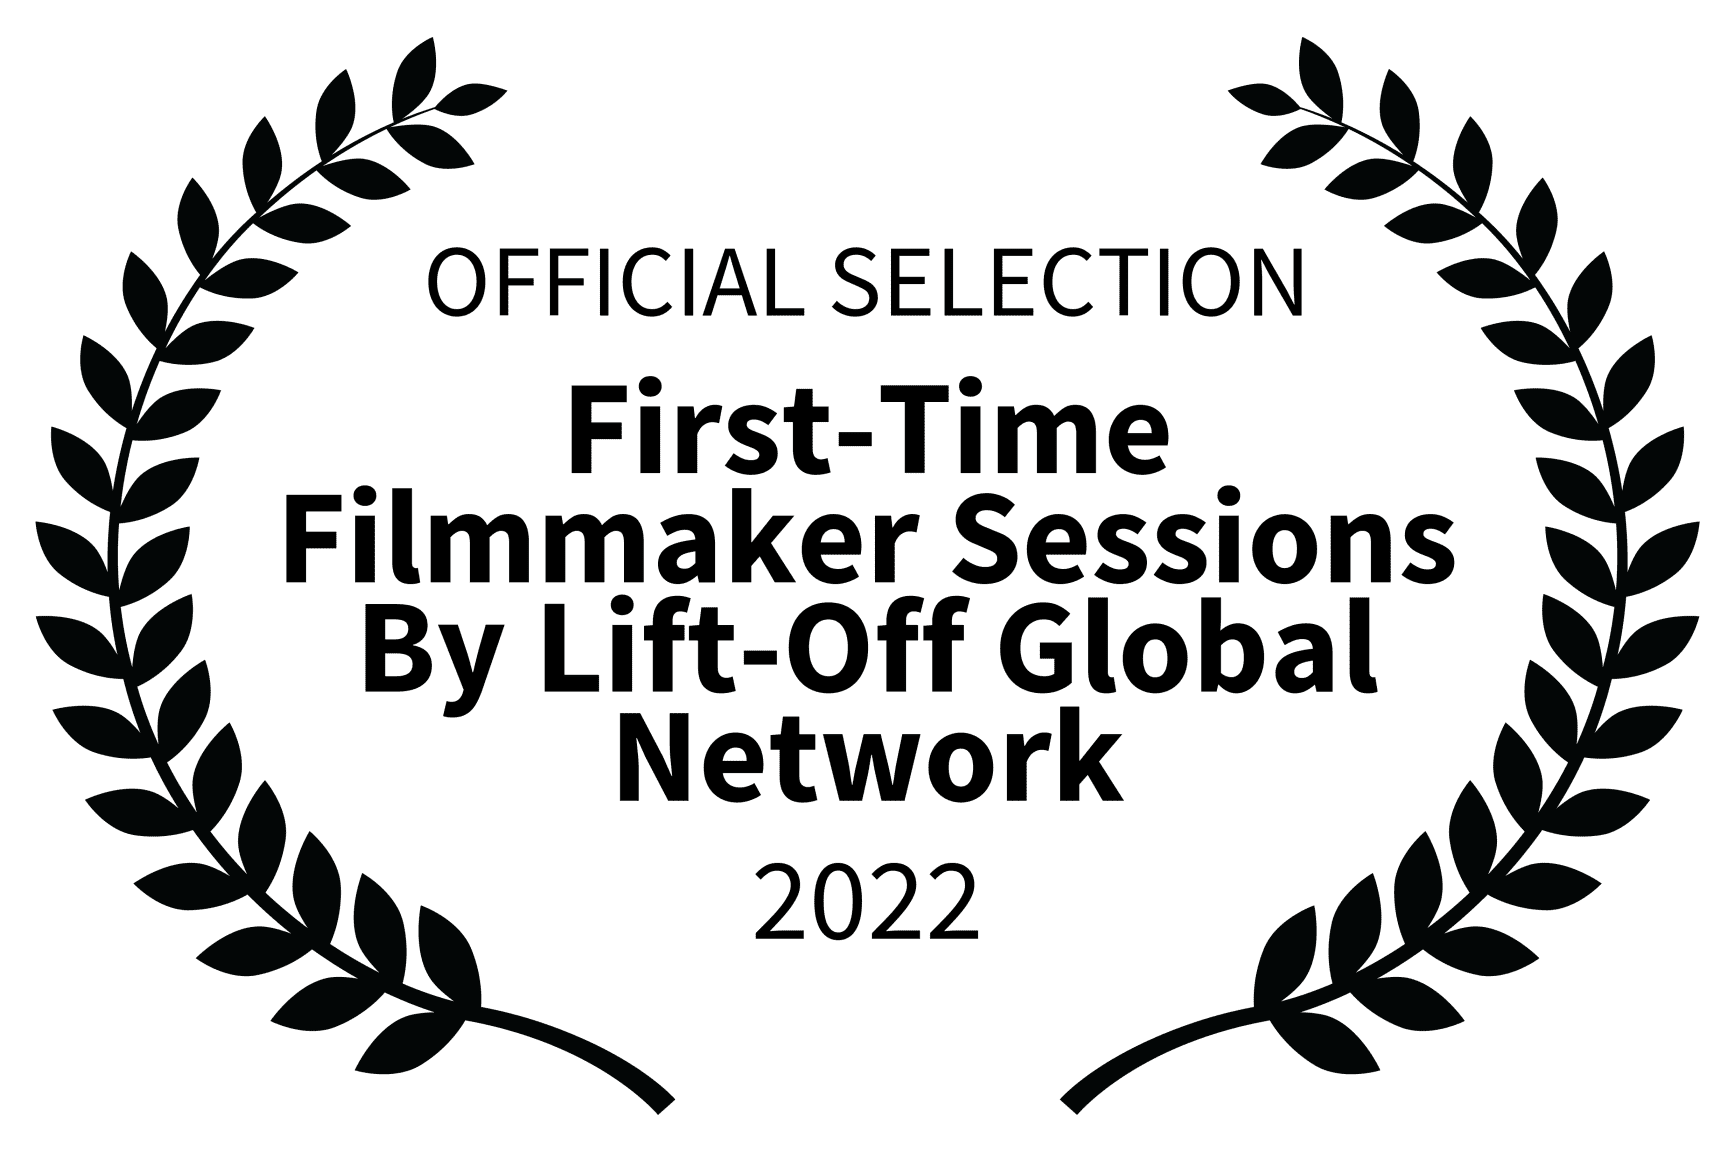 OFFICIAL SELECTION - First-Time Filmmaker Sessions By Lift-Off Global Network - 2022